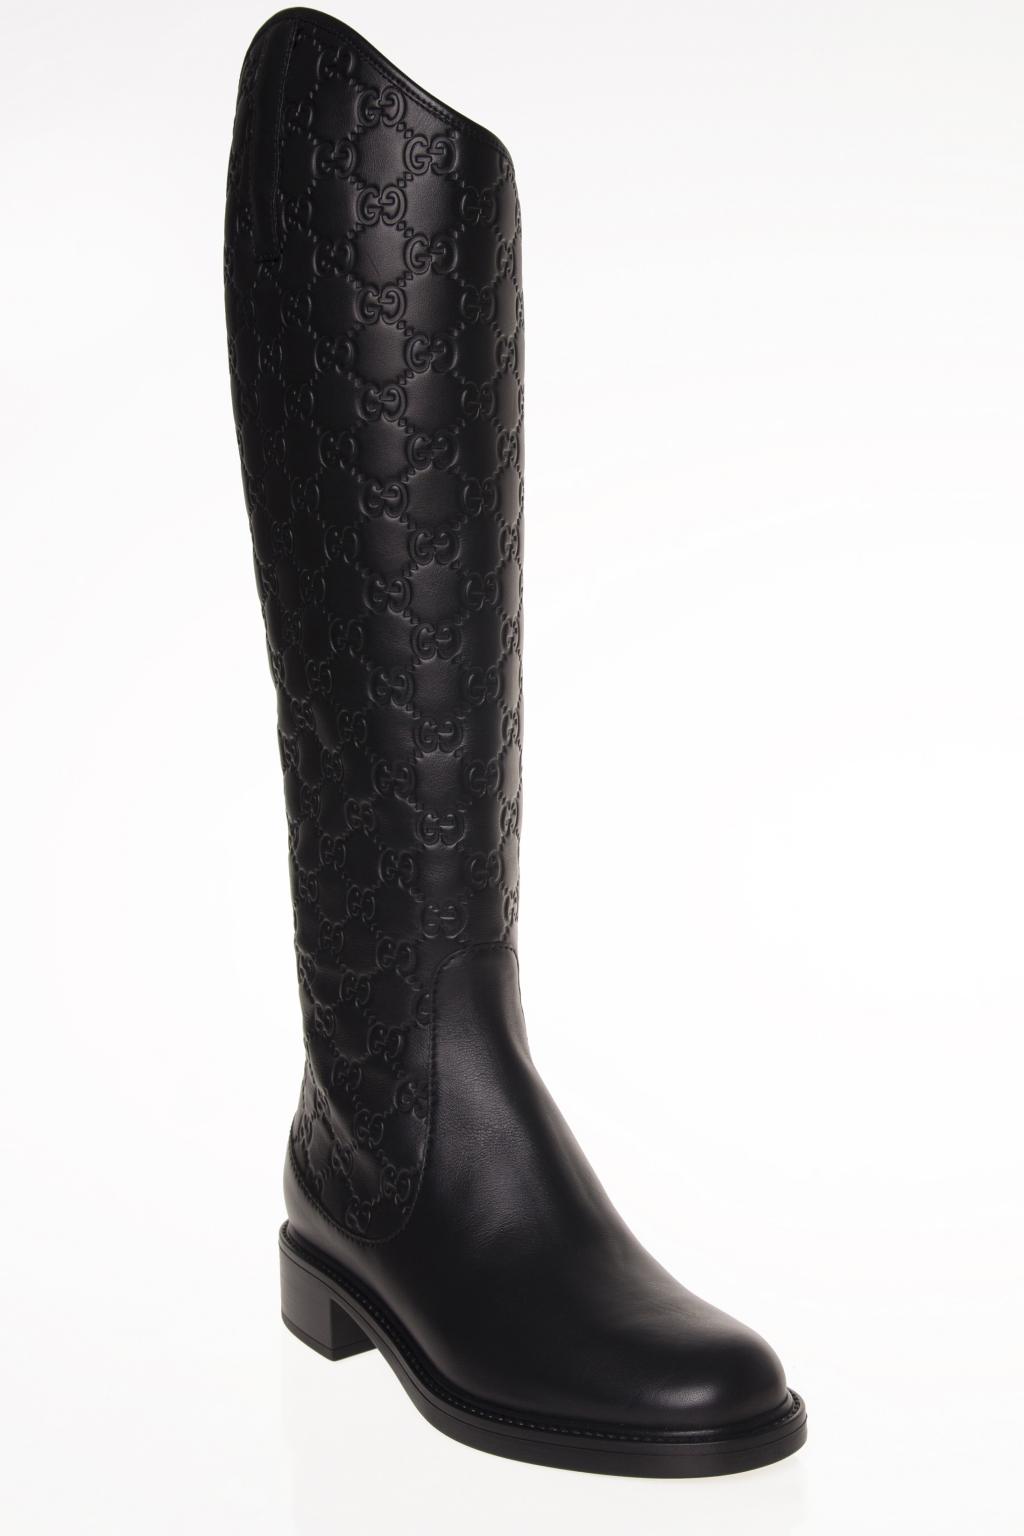 gucci riding boots on sale